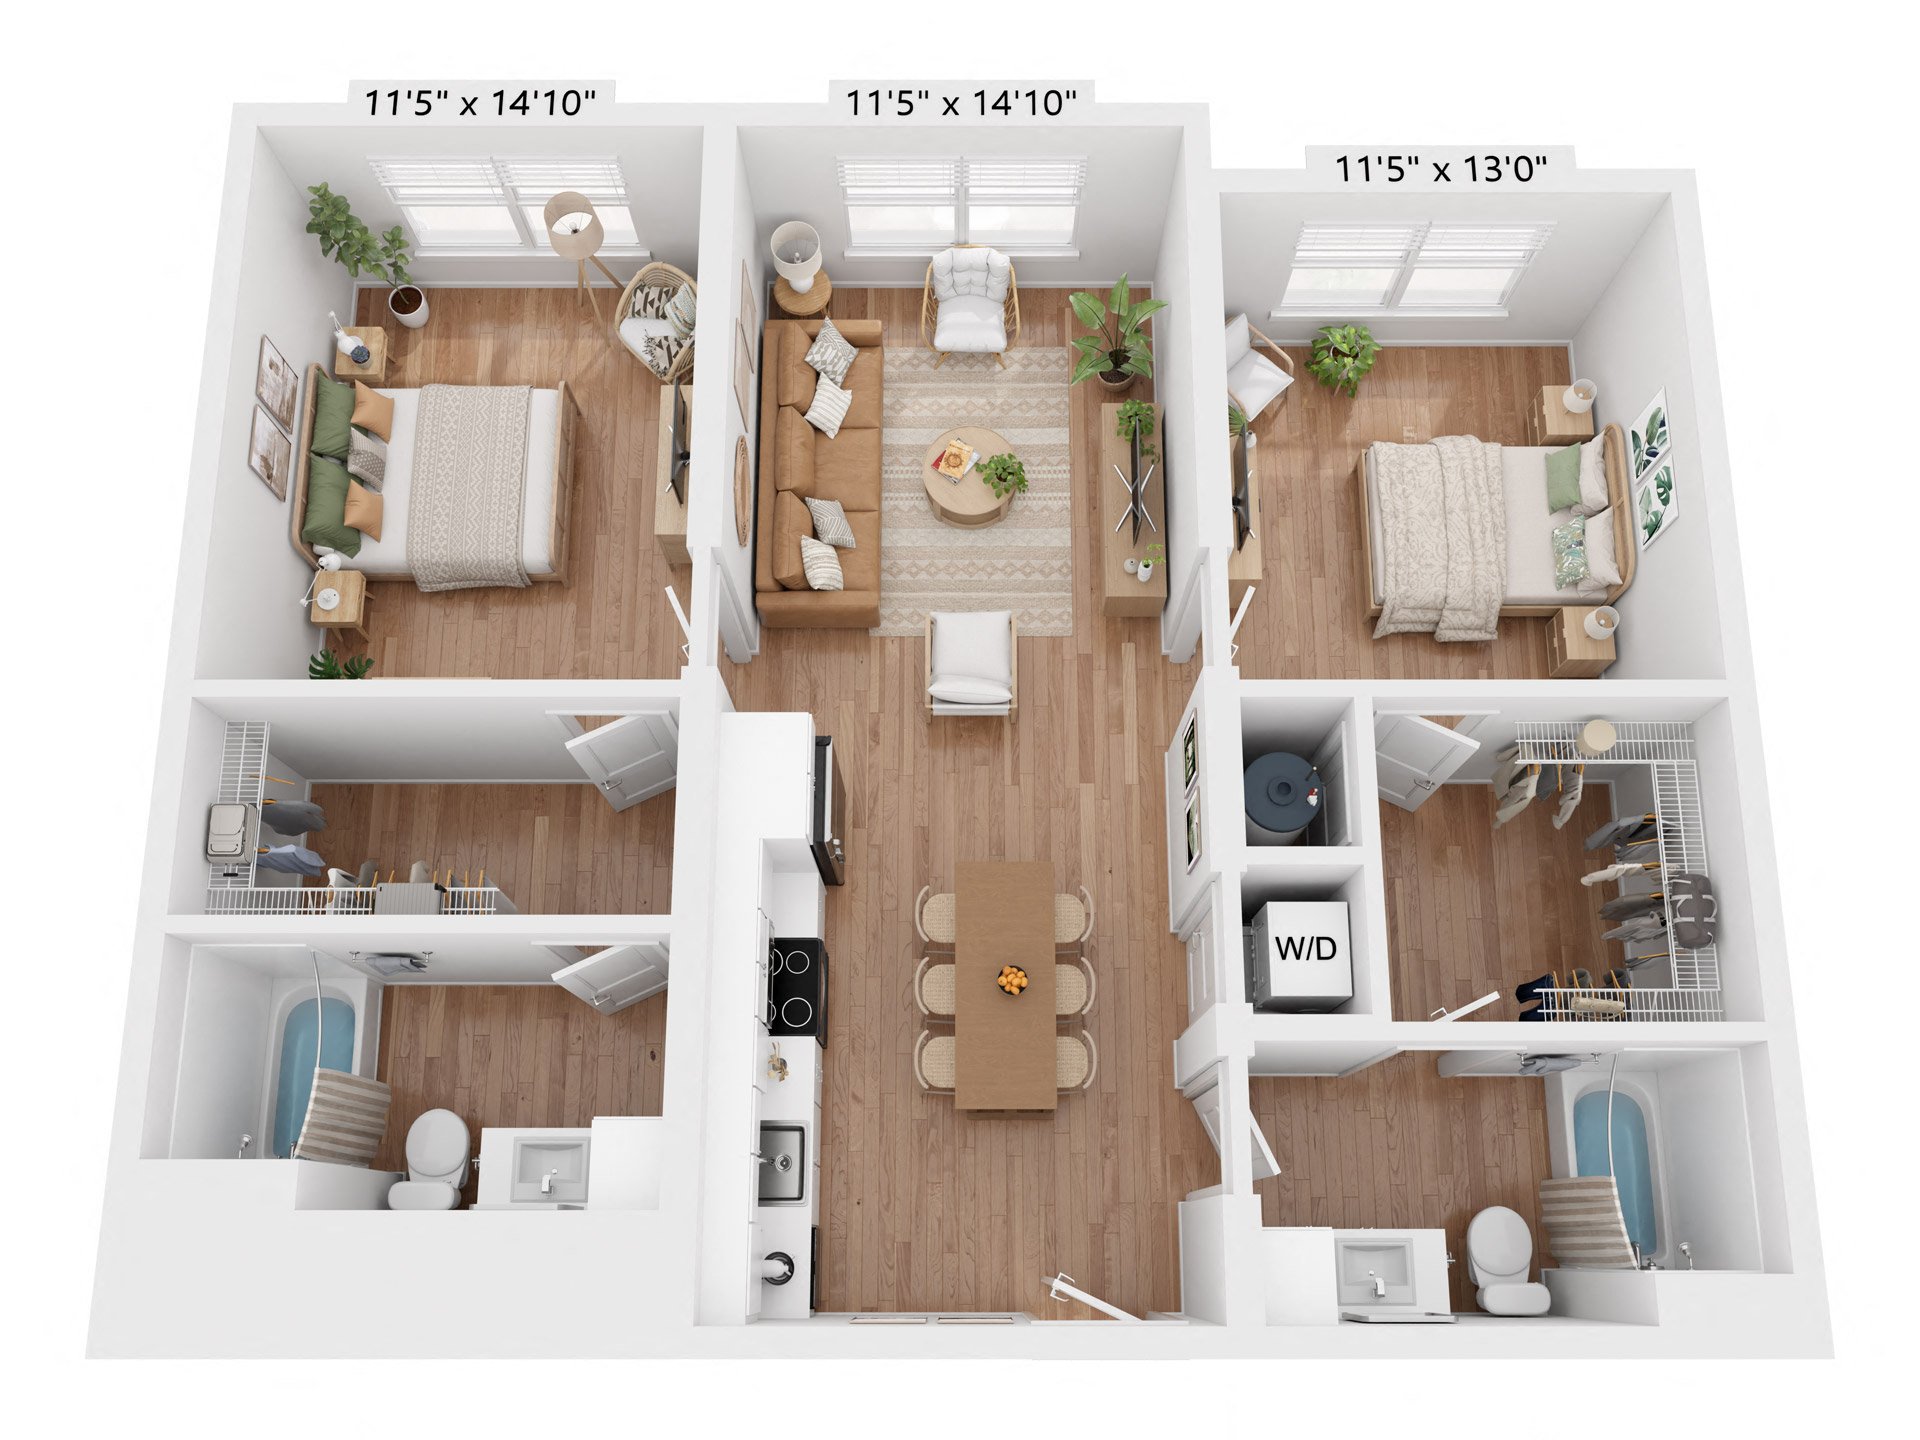 Floor plan map for a two bedroom apartment at Ltd. Findlay in Coraopolis, PA, featuring rooms with dimensions.